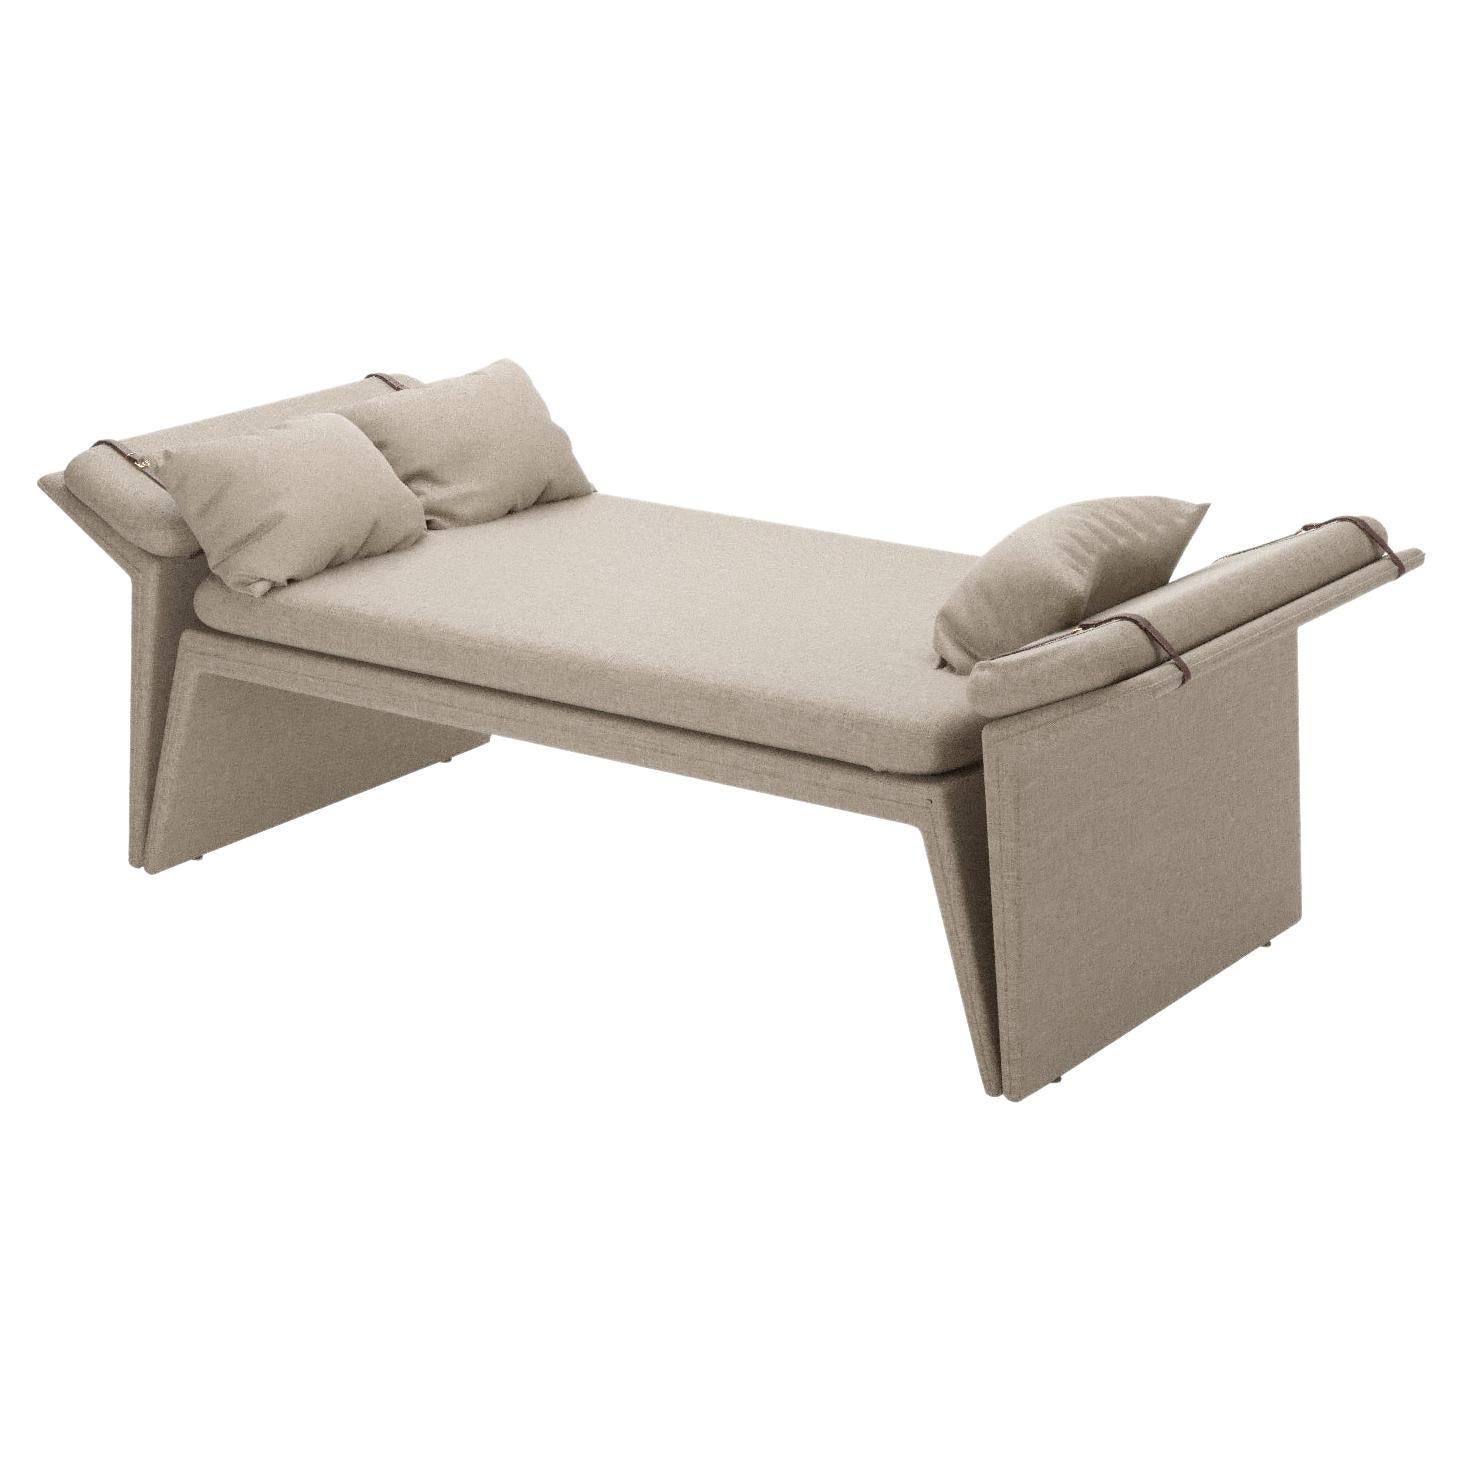 Natural Linen Modern Panama Daybed II For Sale